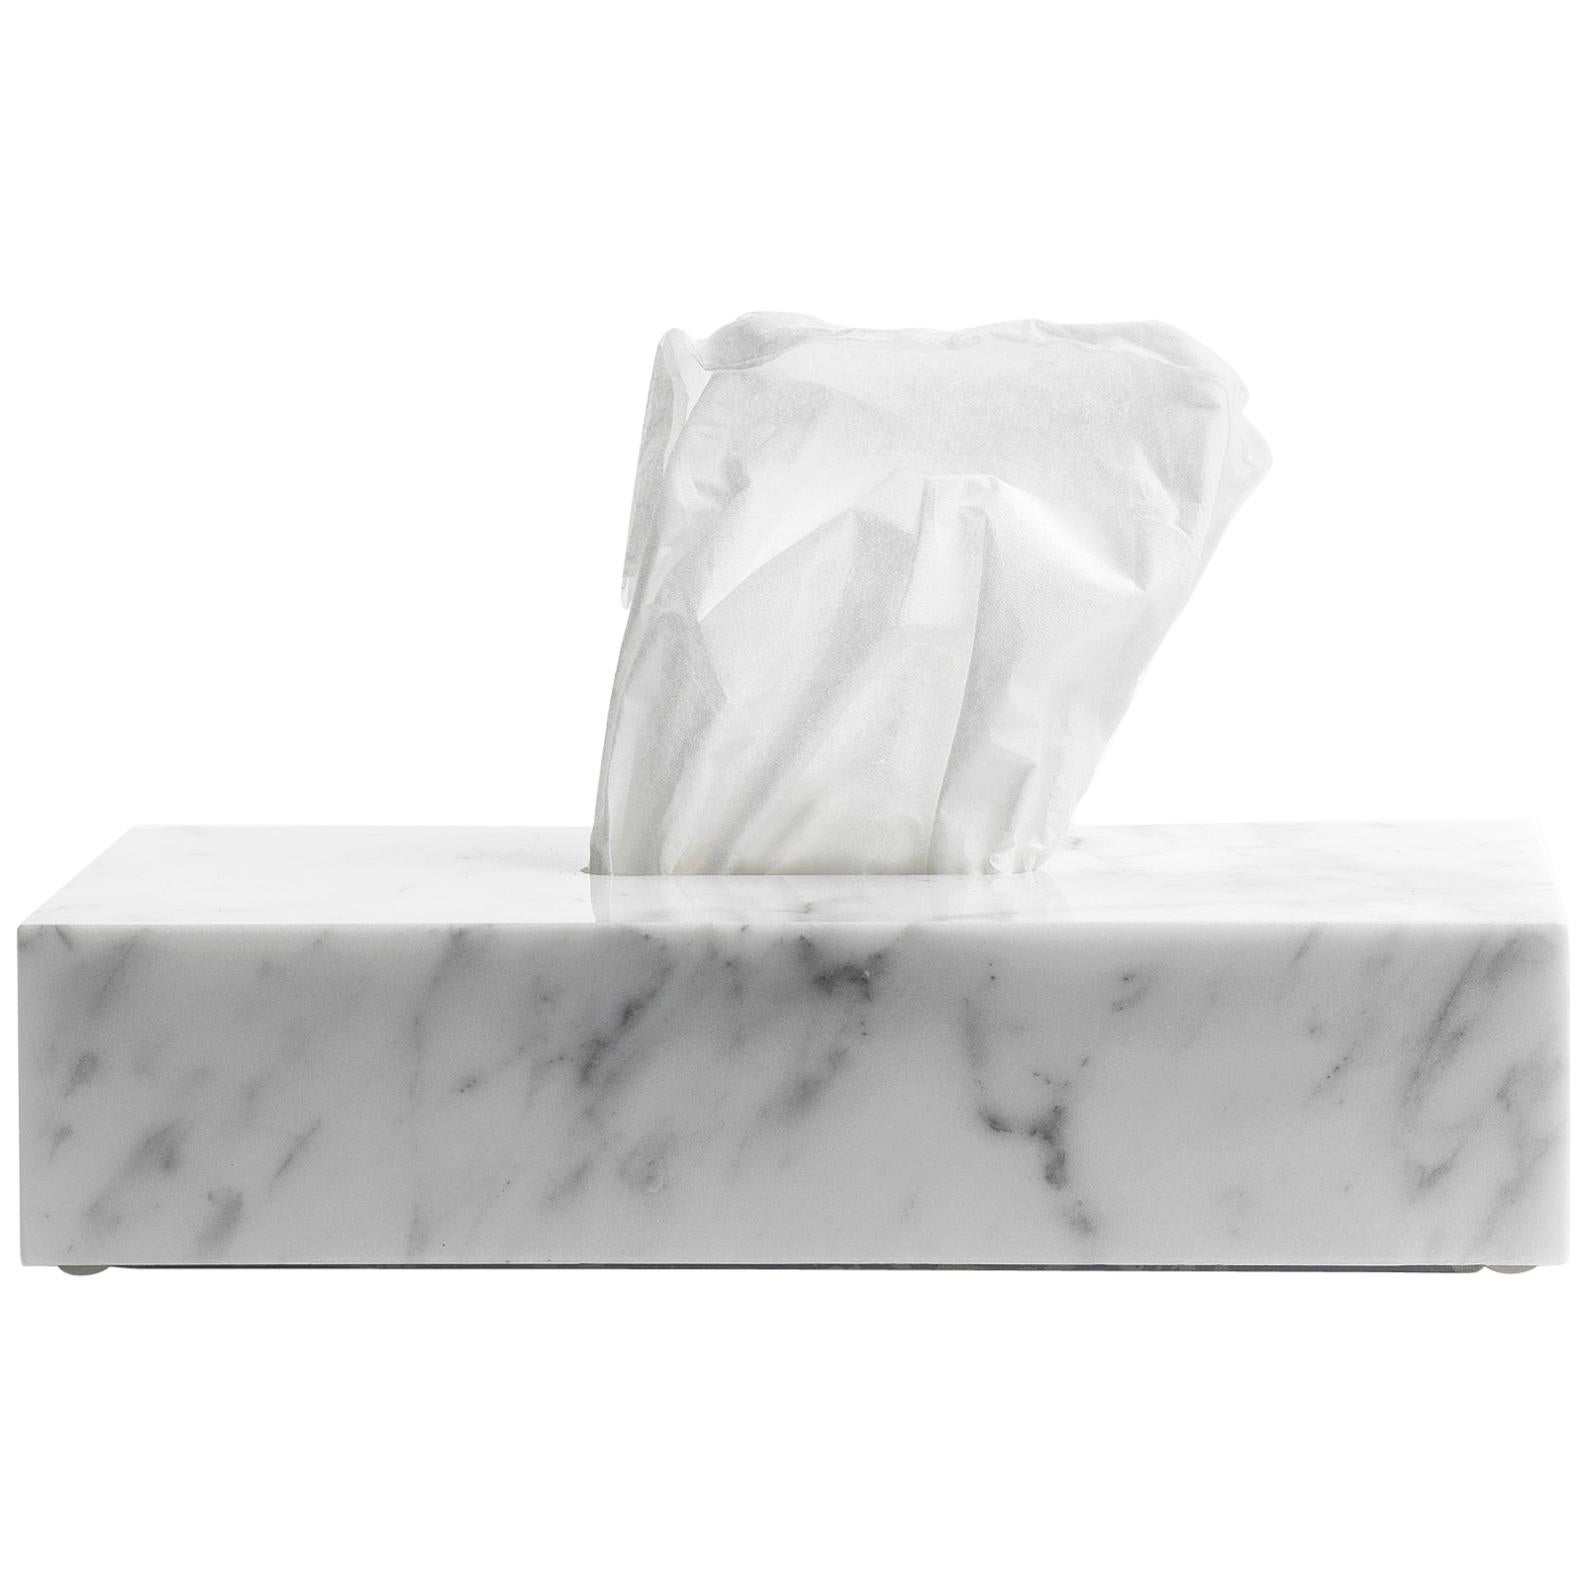 Contemporary Squared Tissues Cover Box in Marble